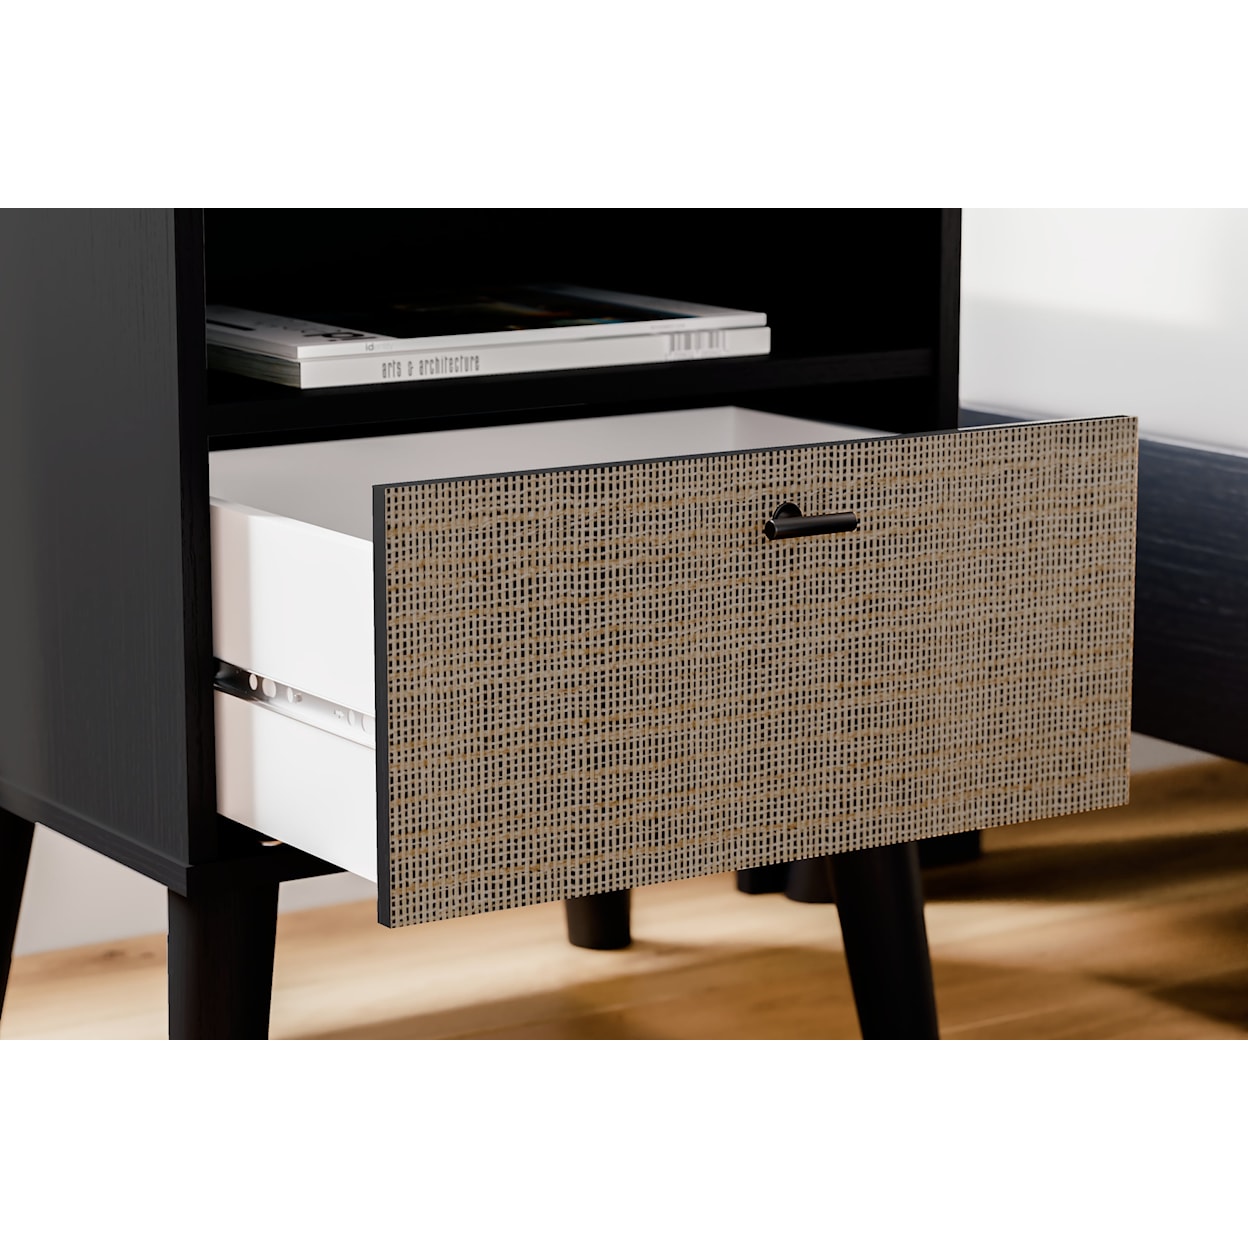 Signature Design by Ashley Charlang 1-Drawer Nightstand